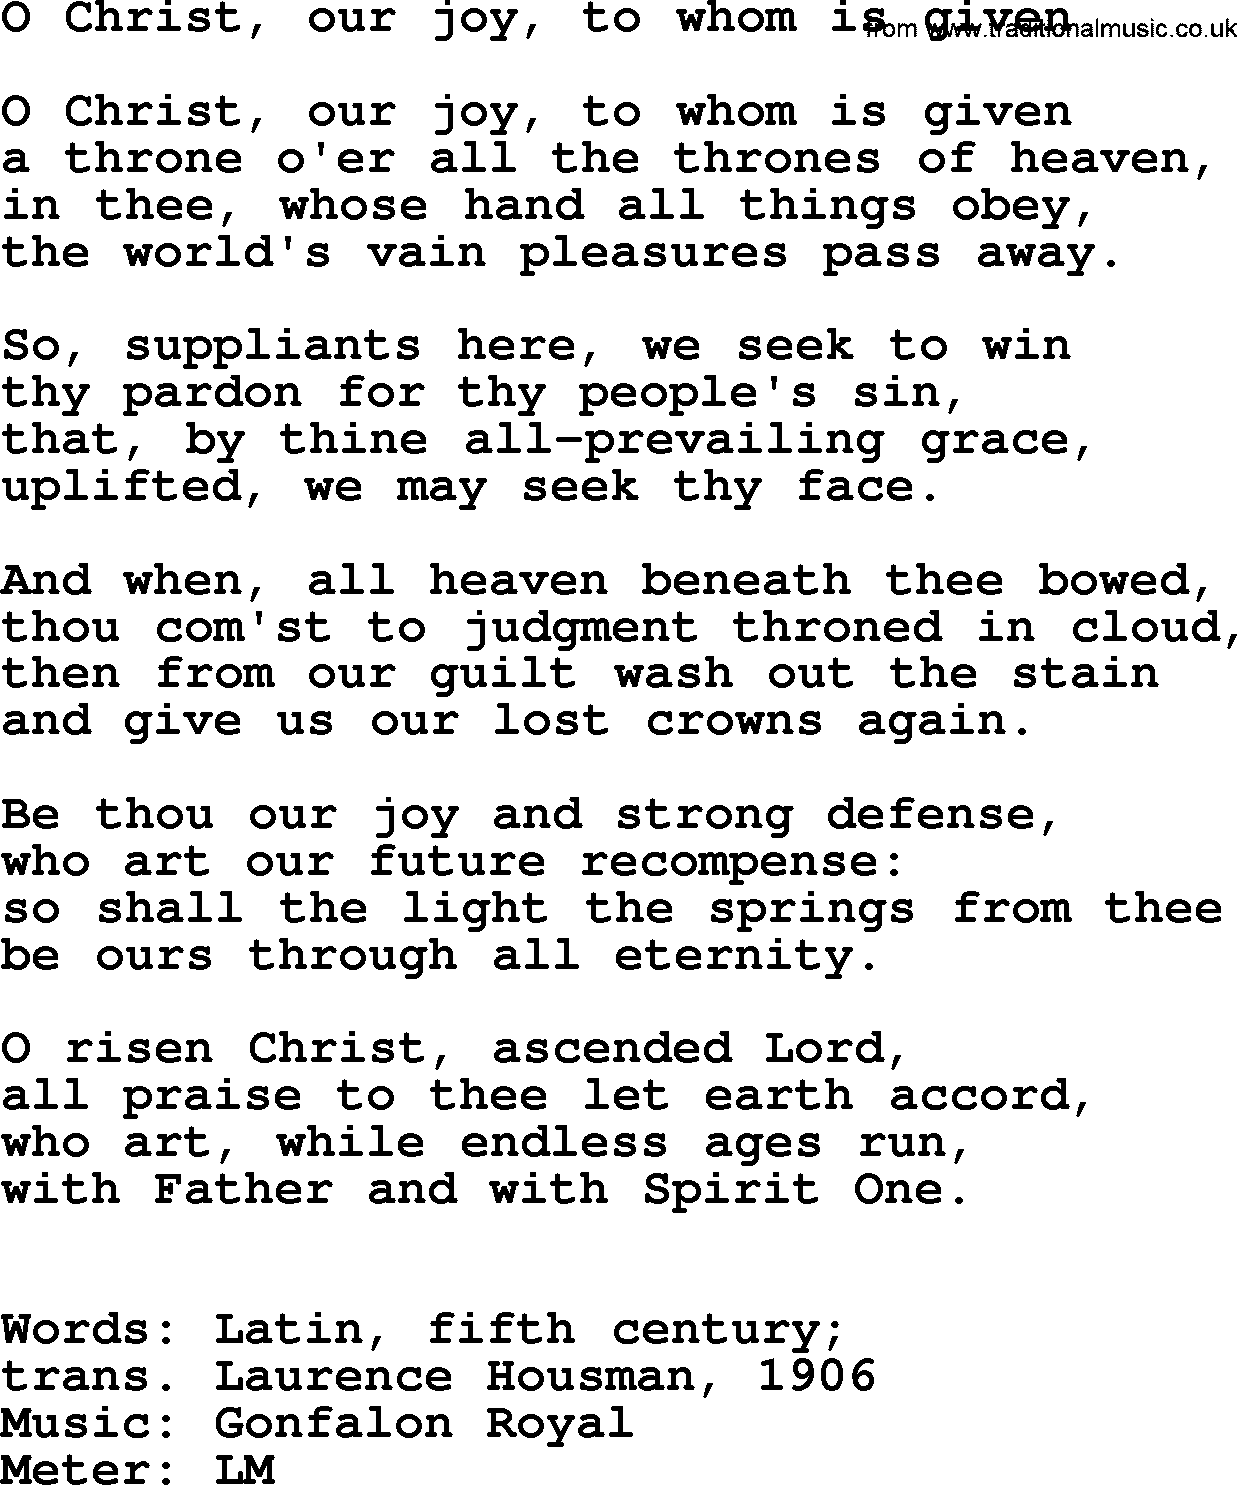 Ascensiontide Hynms collection, Hymn: O Christ, Our Joy, To Whom Is Given, lyrics and PDF